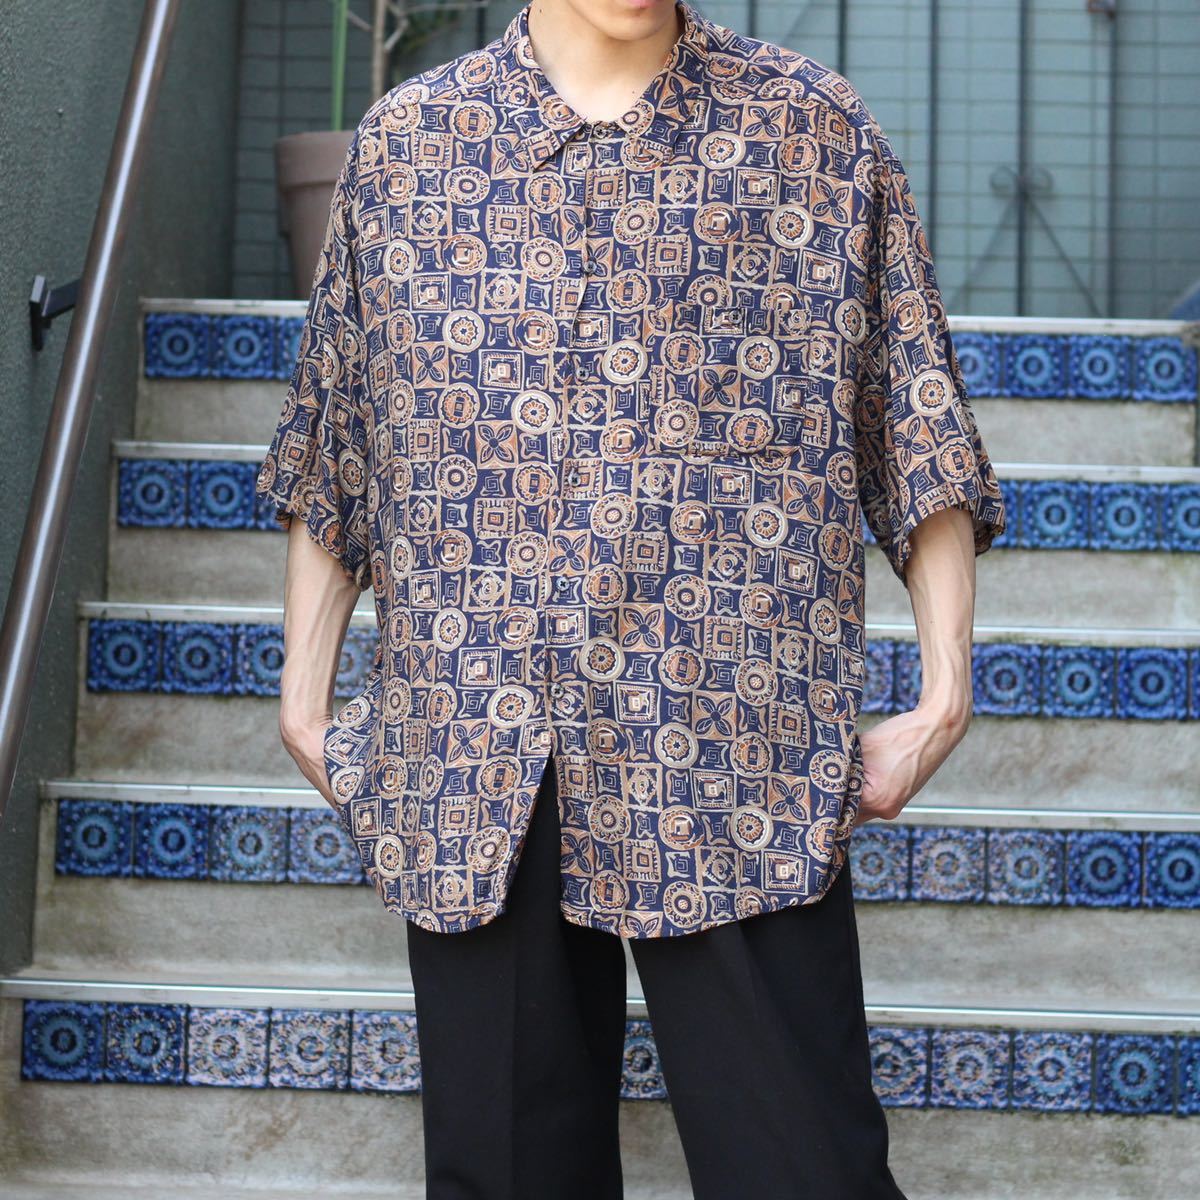 USA VINTAGE HALF SLEEVE PATTERNED ALL OVER SHIRT/アメリカ古着半袖